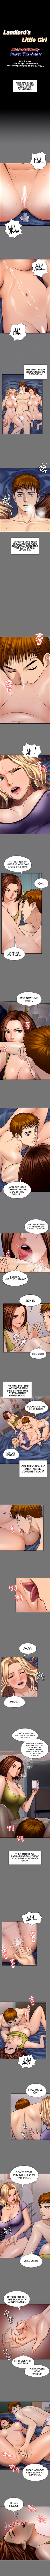 Panel Image 1 for chapter 116 of manhwa Queen Bee on read.oppai.stream